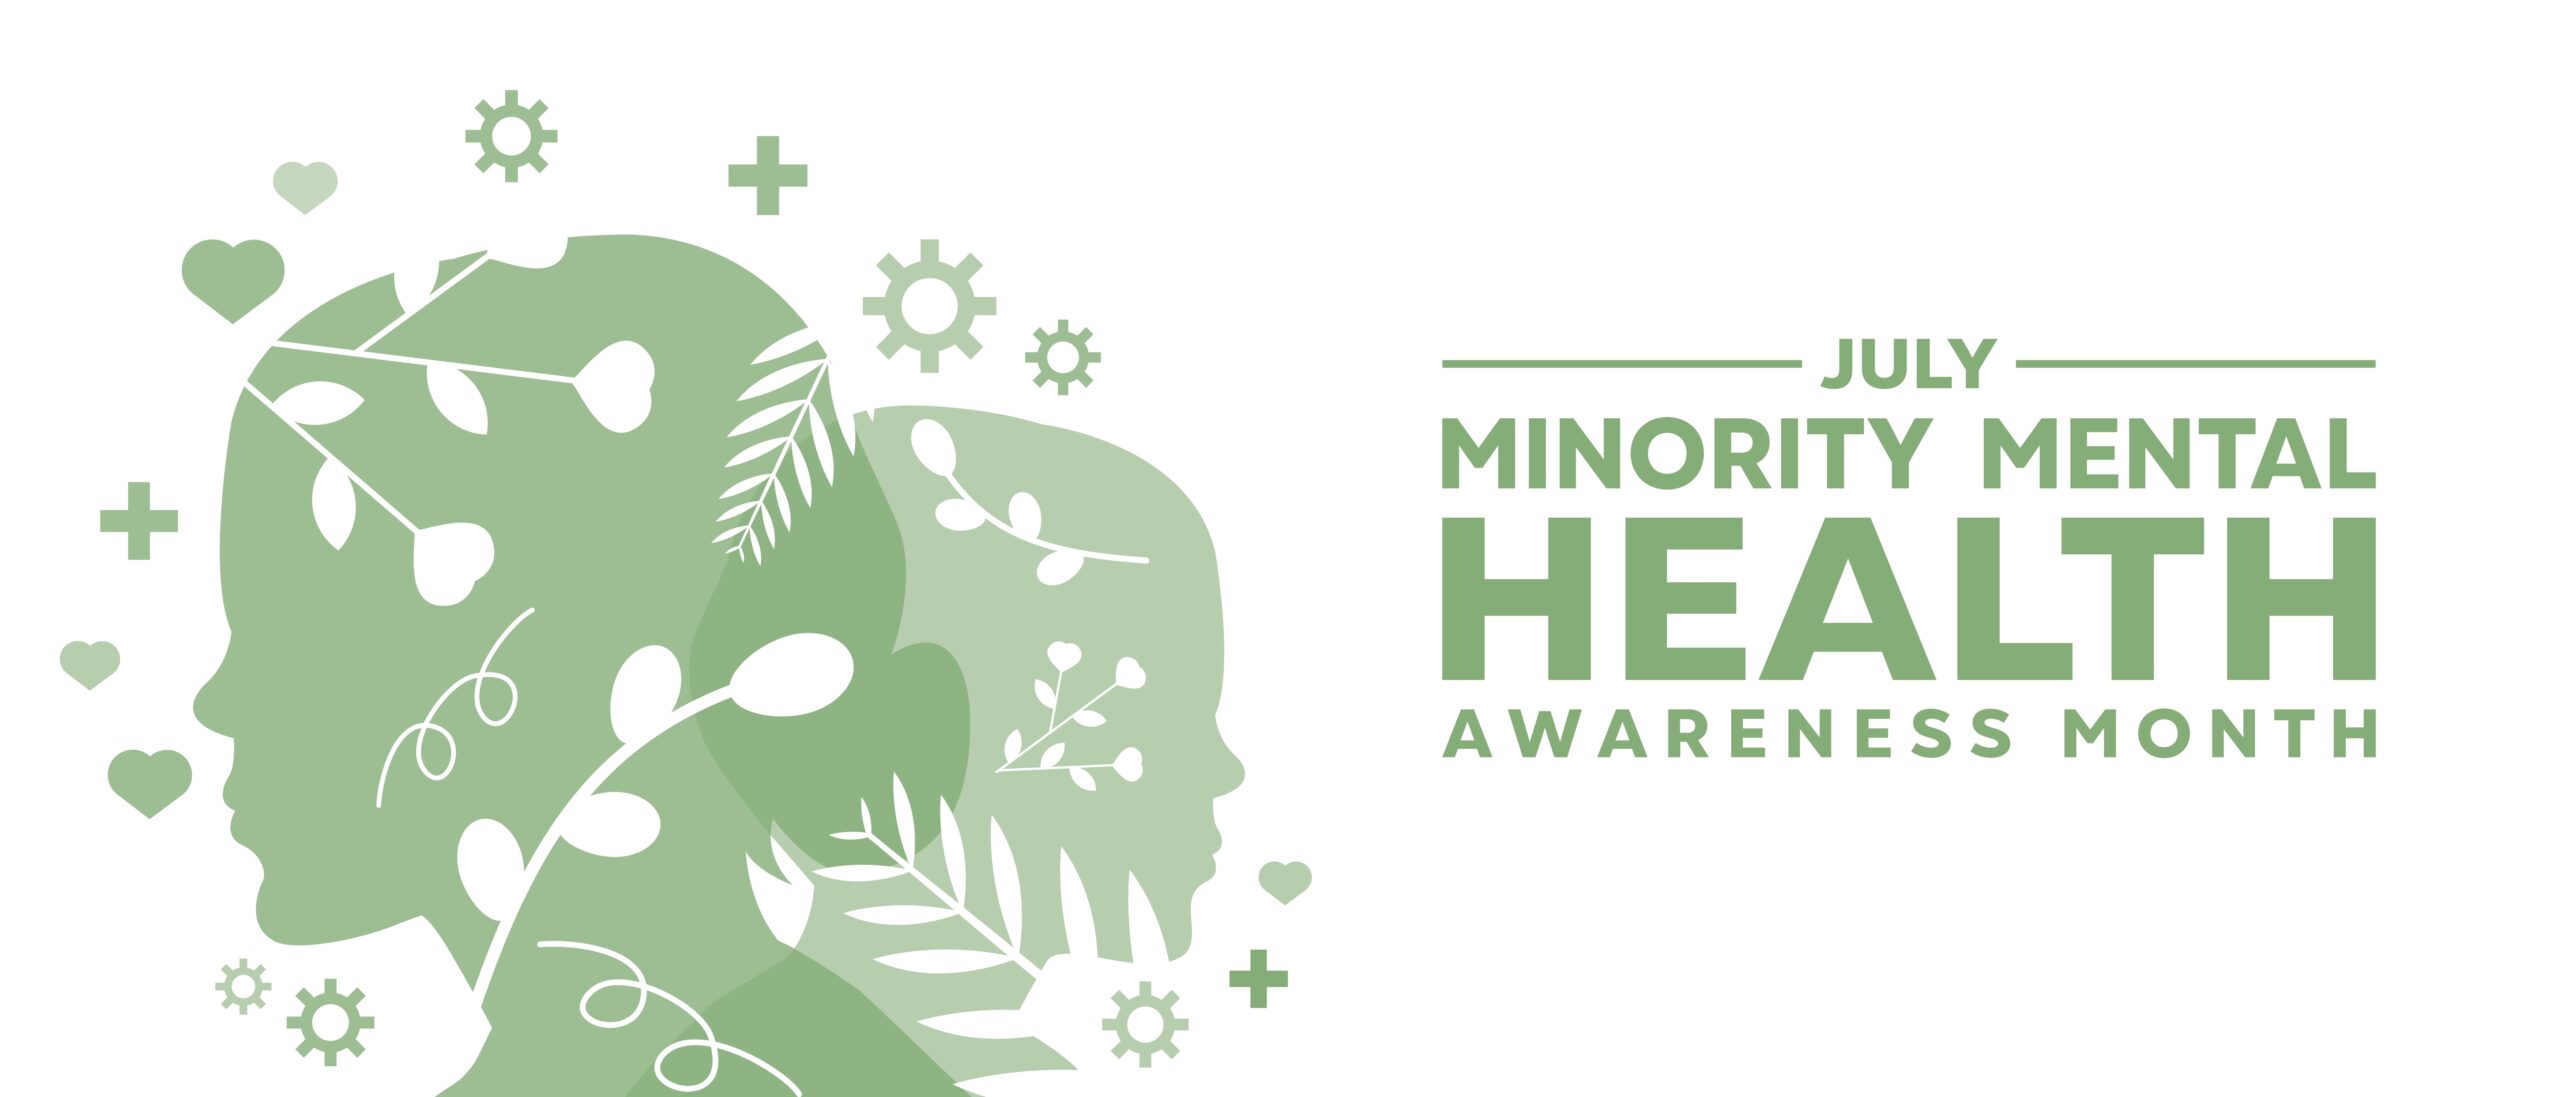 National Minority Mental Health Awareness Month:  Addressing mental health challenges faced by minority communities